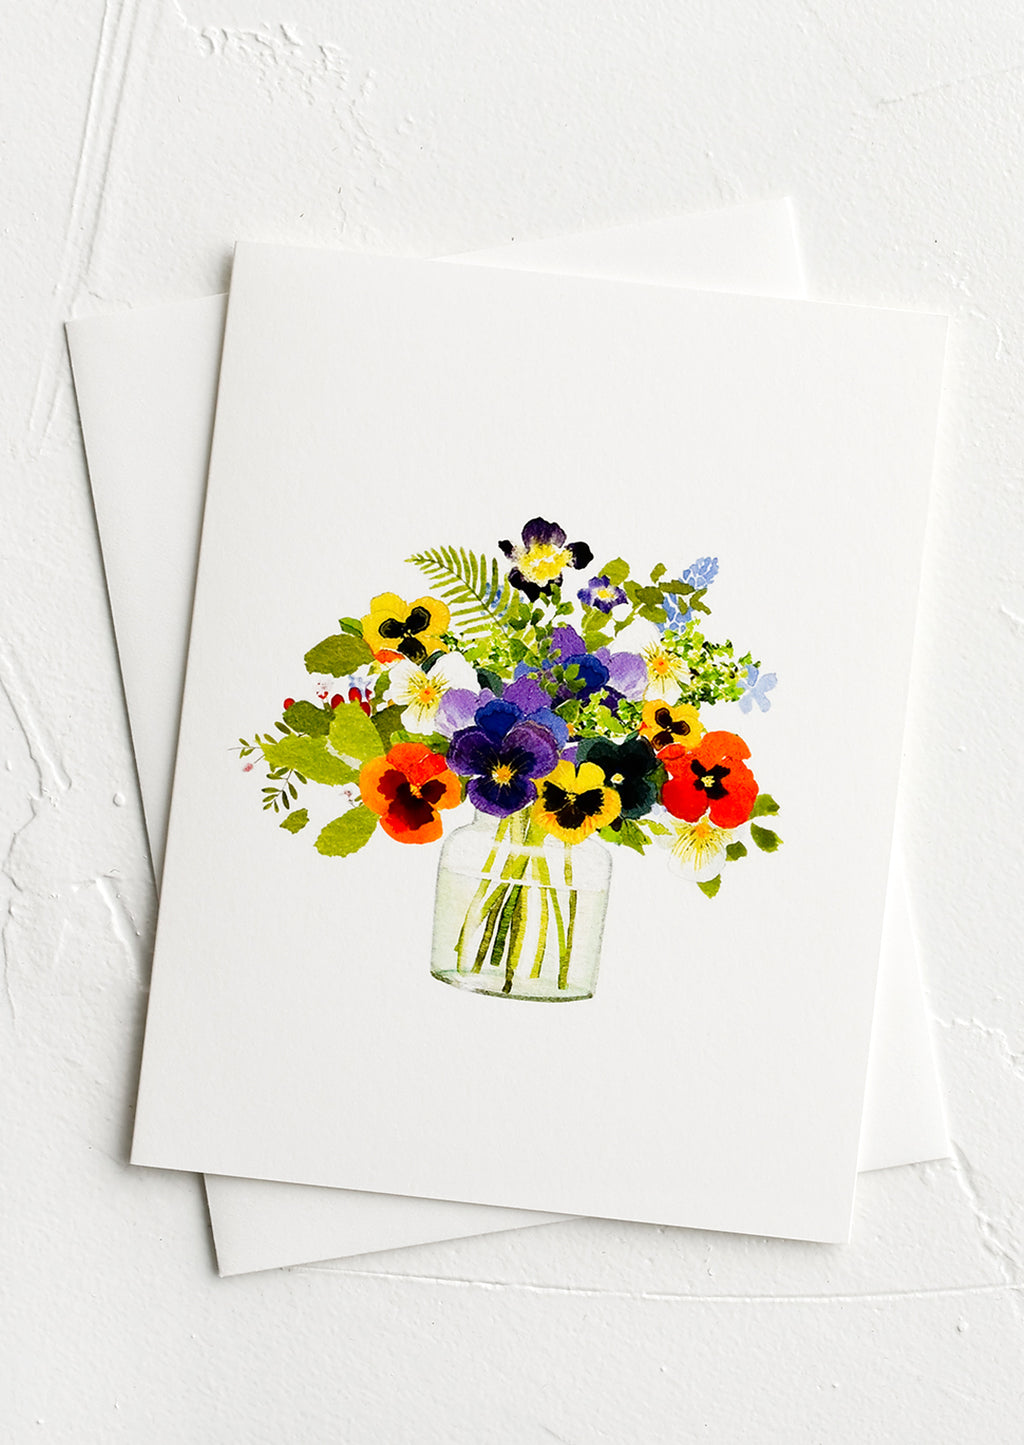 Annuals: A greeting card with illustration of annual flowers in a vase.